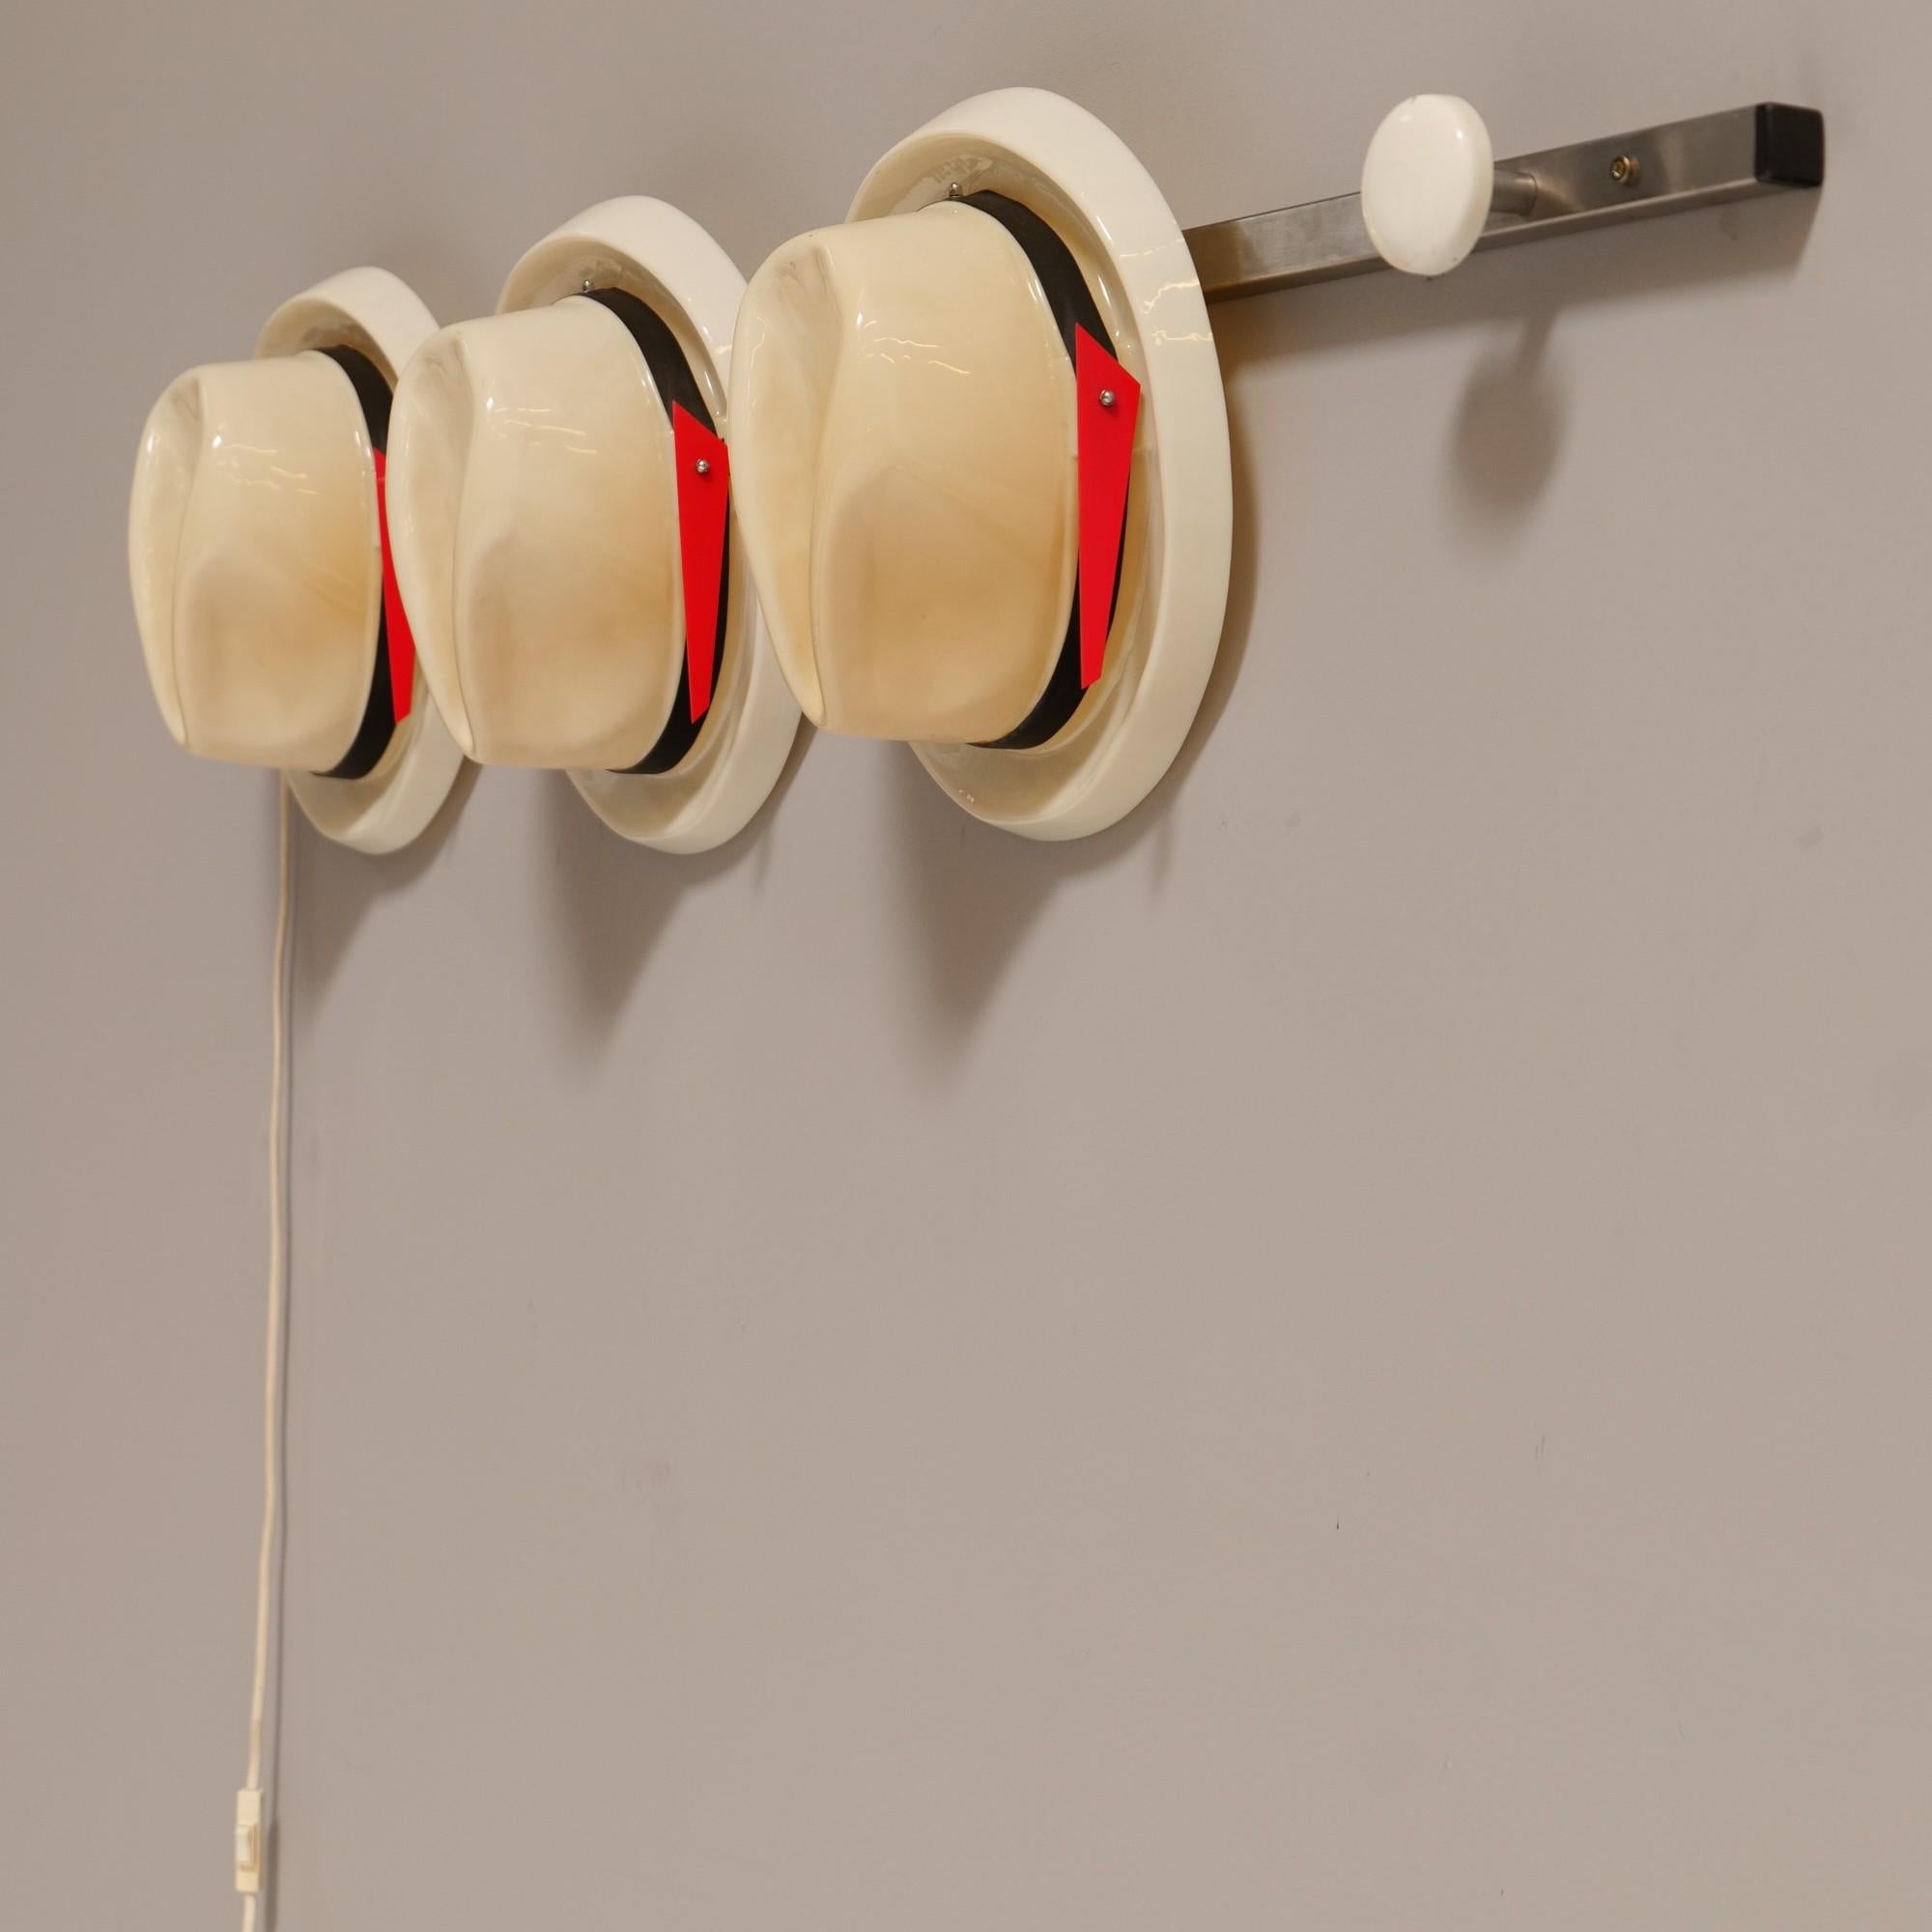 Jacques Vojnovic, light object from the film adaptation of the book “IT” by Steven King, 1990.

This is a light art object probably by Jacques Vojnovic.

It consists of three hats and a dress button, mounted on a metal rod.

The hats are made